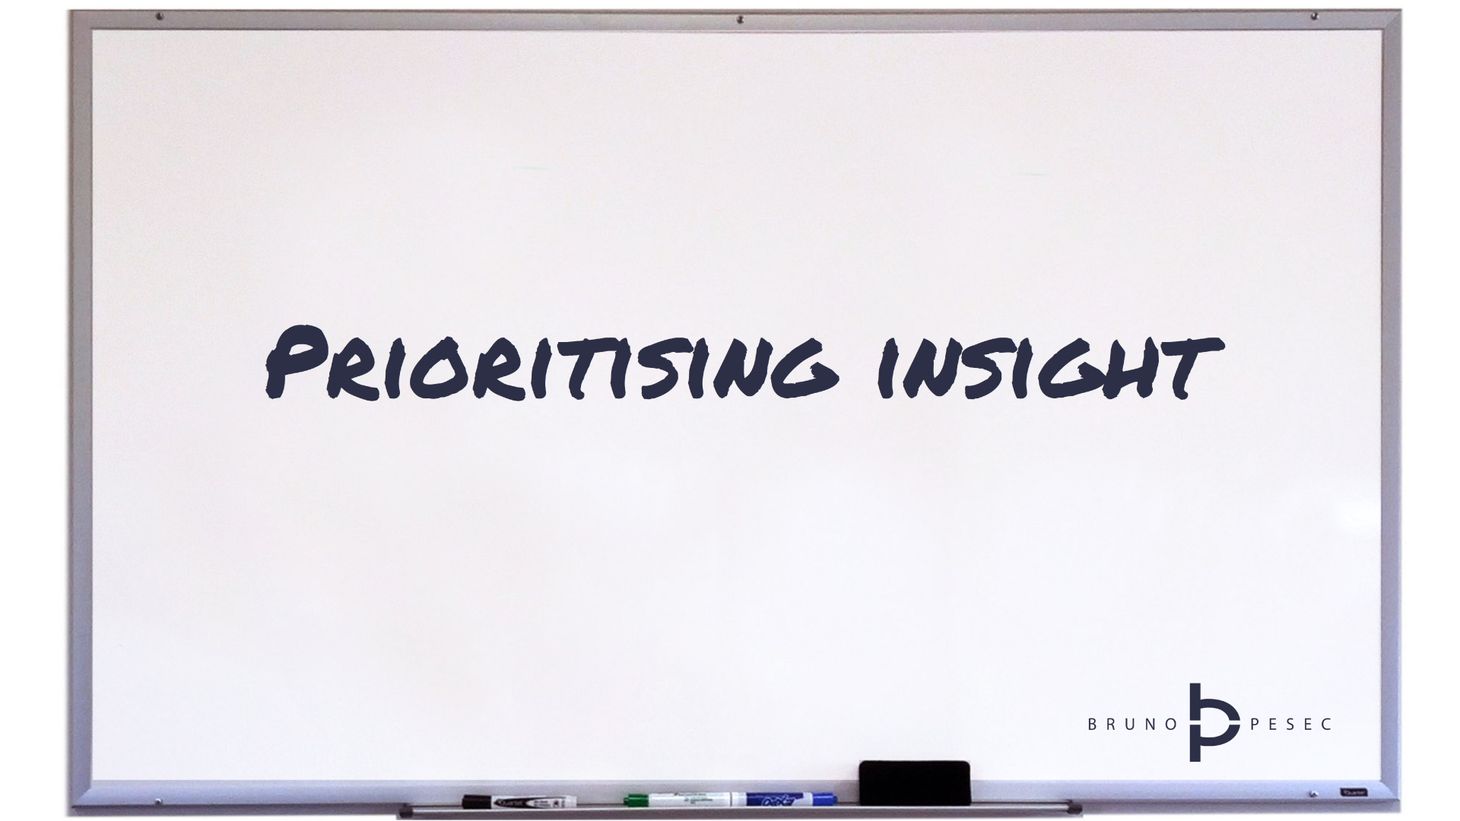 How to prioritise insight rapidly?